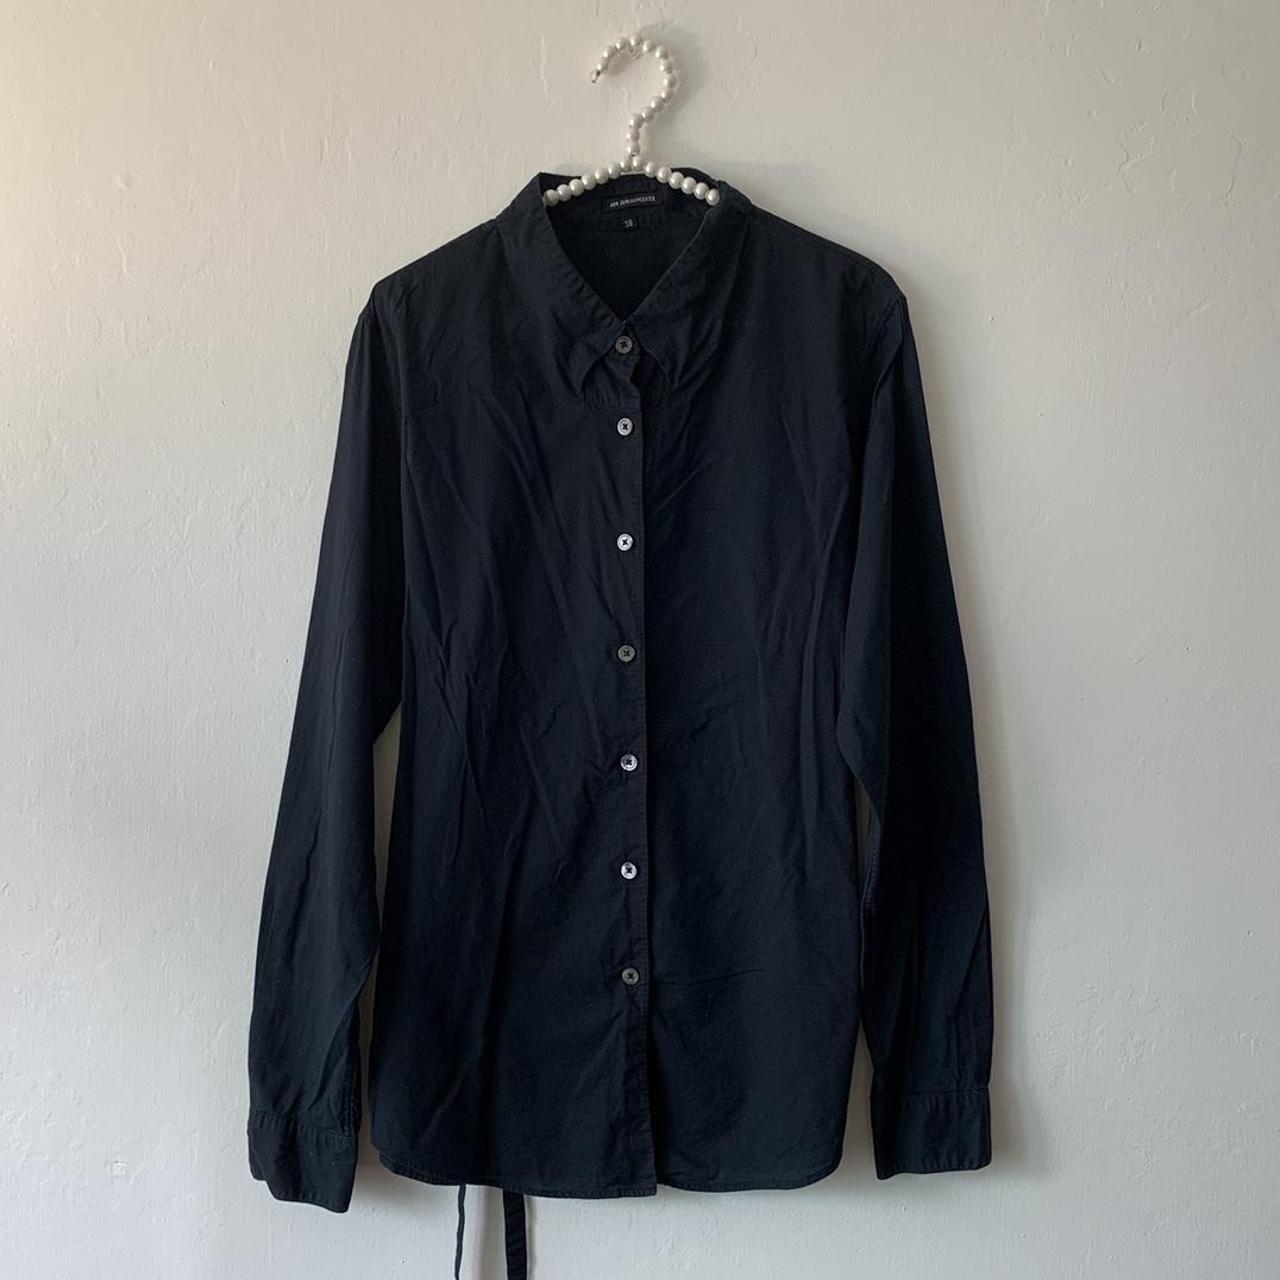 Product Image 1 - ⛓ ann demeulemeester navy blue